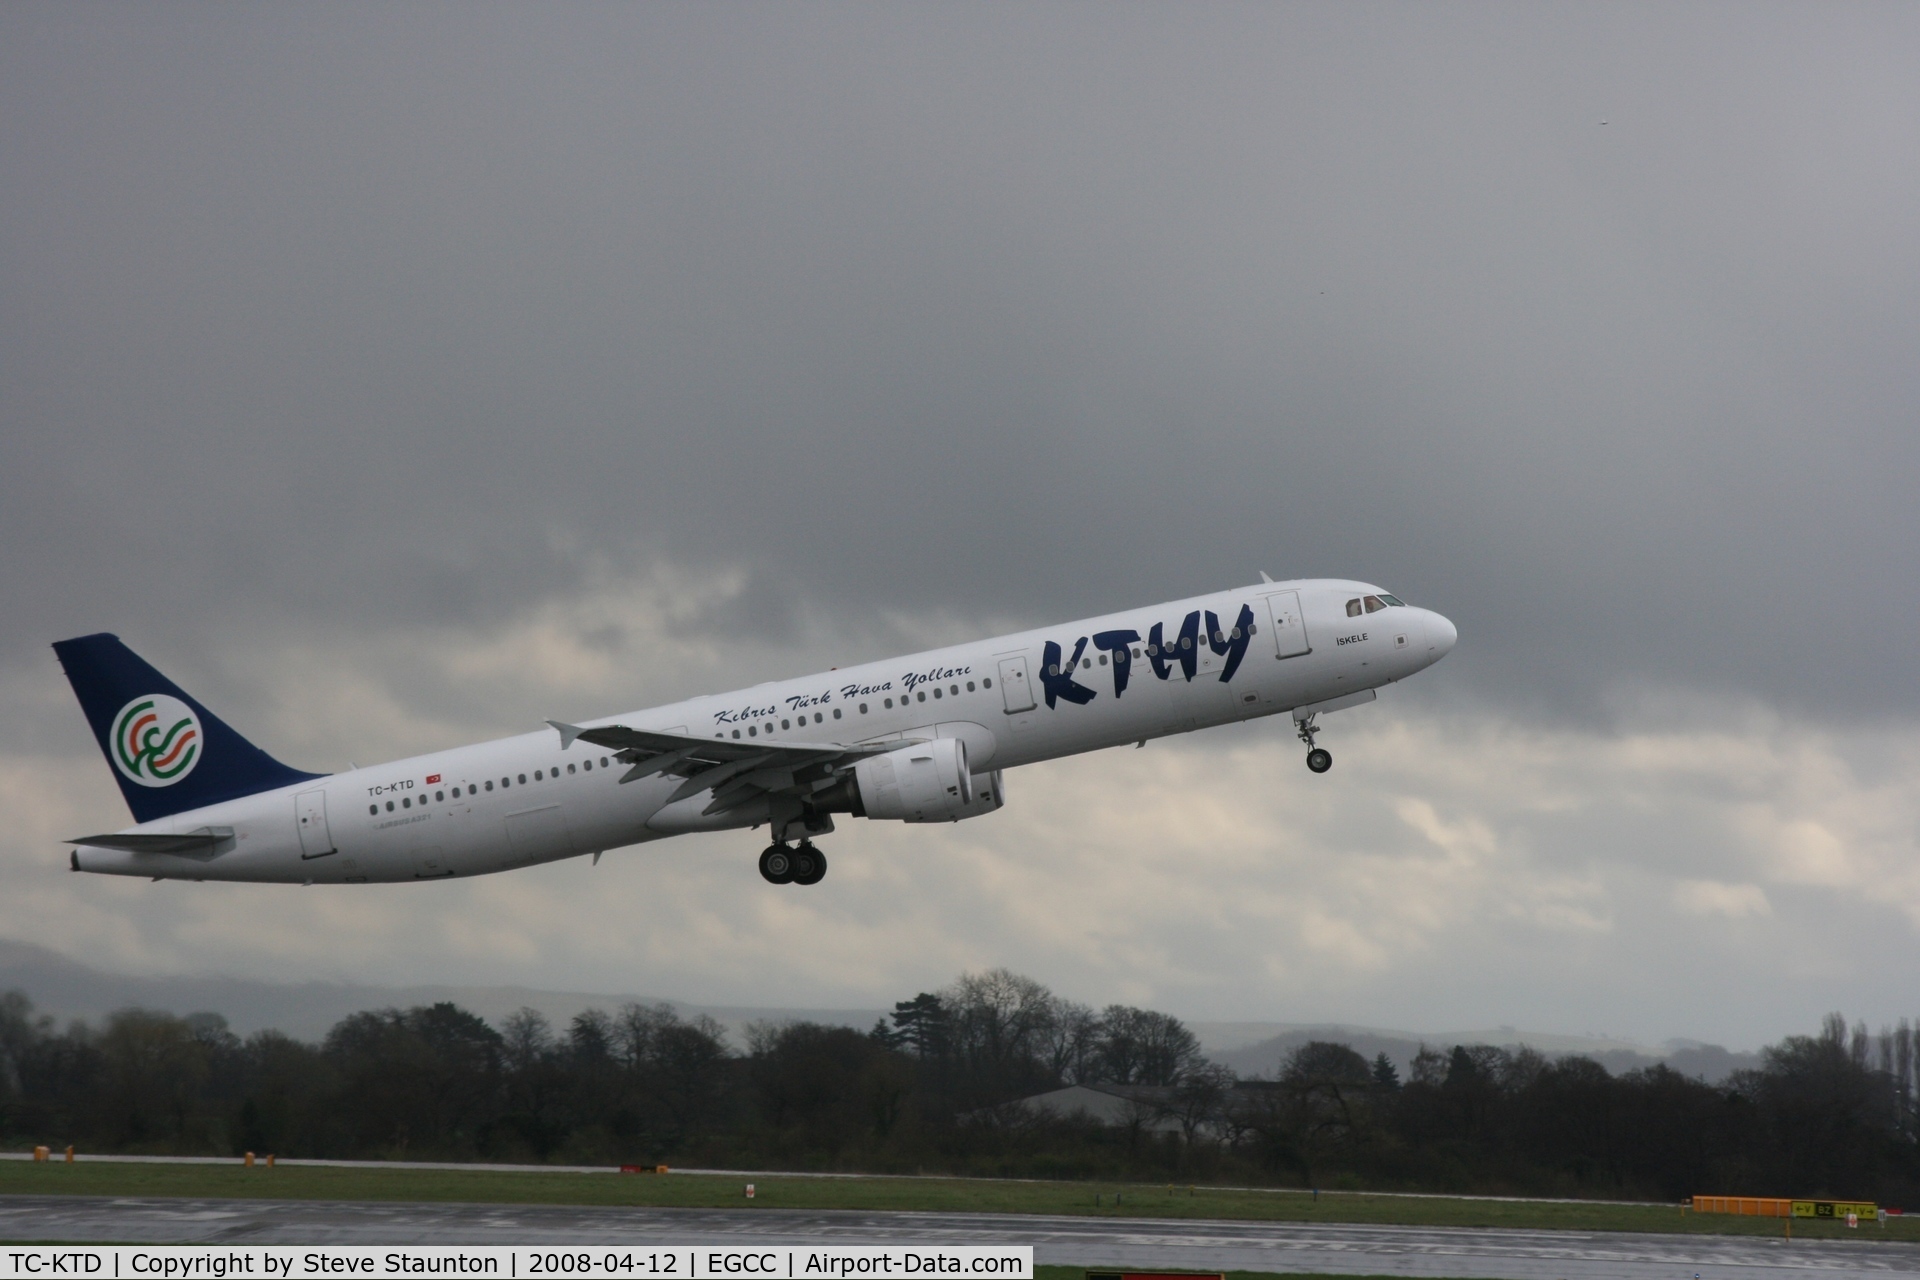 TC-KTD, 2003 Airbus A321-211 C/N 2117, Taken at Manchester Airport on a typical showery April day